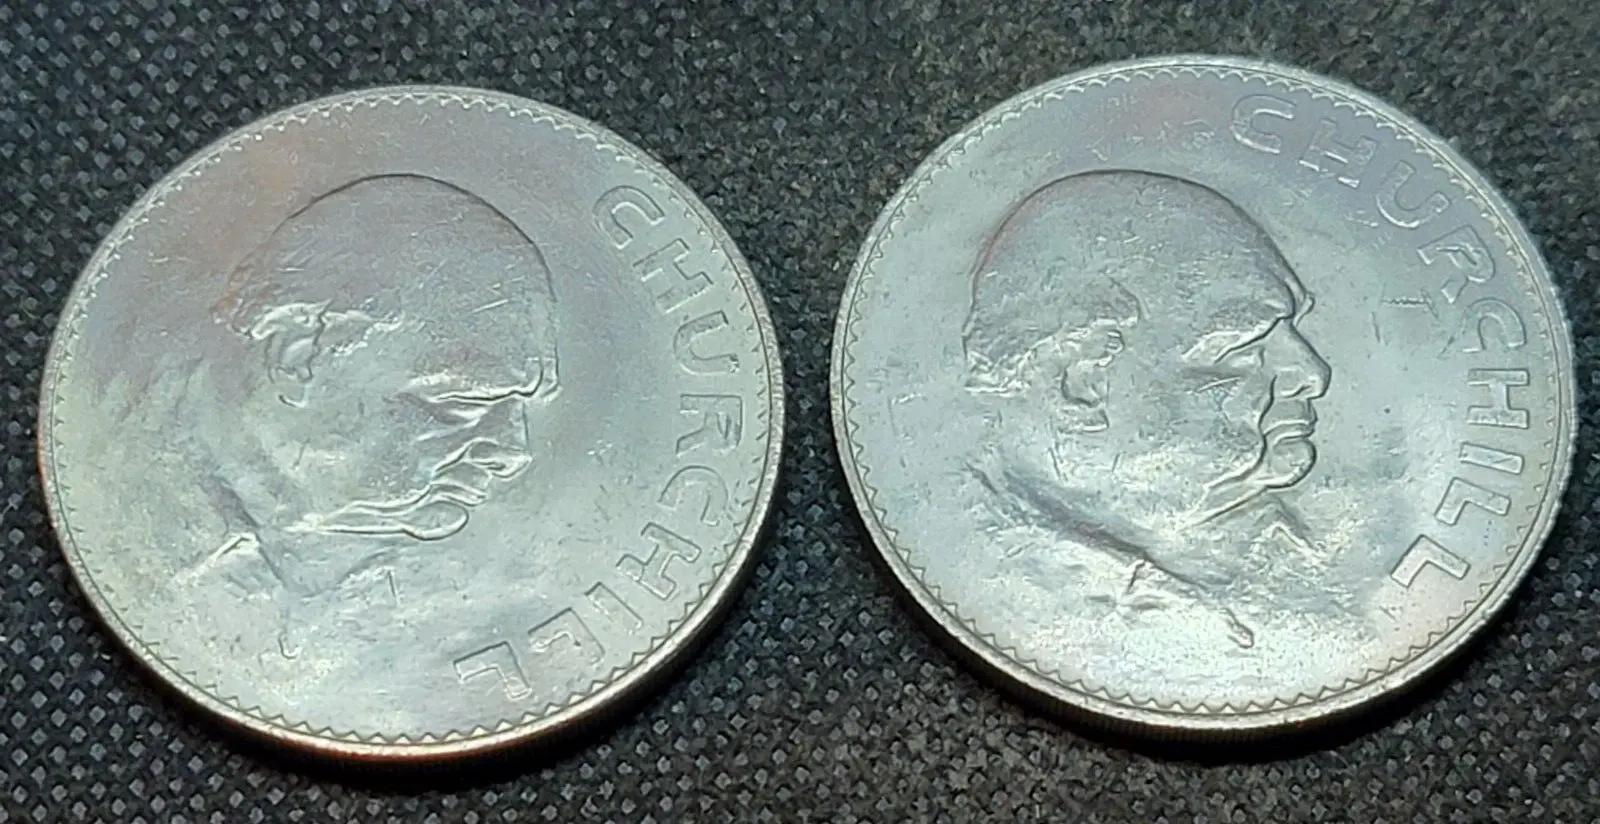 2 Great Britian 1965 Churchill Coins, See Pictures L498